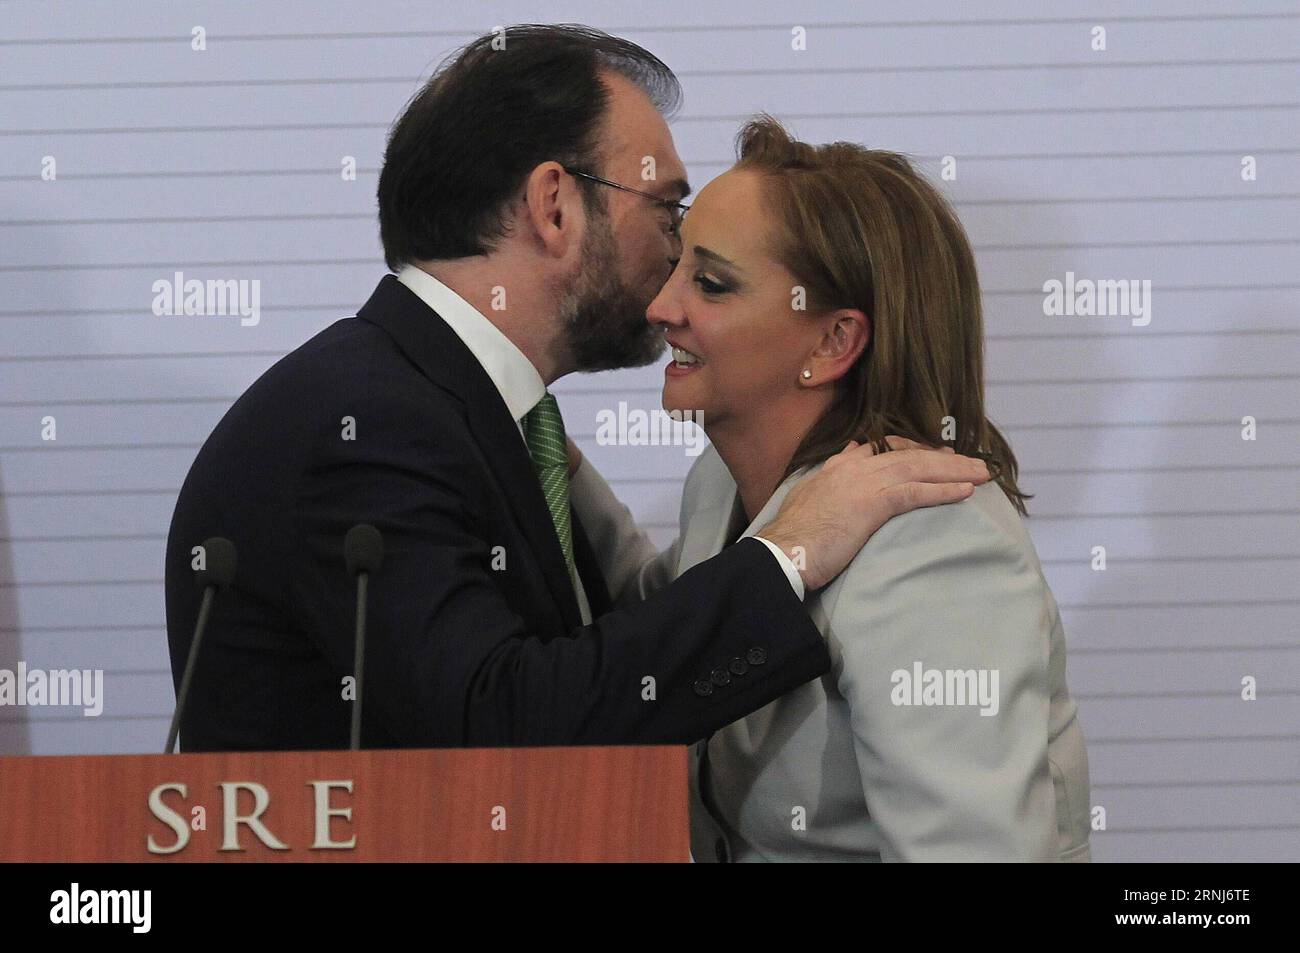 (170105) -- MEXICO CITY, Jan. 4, 2017 -- Mexico s new Foreign Minister Luis Videgaray (L) and his predecessor Claudia Ruiz Massieu attend a press conference in Mexico City, capital of Mexico, on Jan. 4, 2017. Mexican President Enrique Pena Nieto on Wednesday named former Economy Minister Luis Videgaray Caso as his new foreign minister, replacing Claudia Ruiz Massieu. ) (zcc) MEXICO-MEXICO CITY-NEW FOREIGN MINISTER STR PUBLICATIONxNOTxINxCHN   Mexico City Jan 4 2017 Mexico S New Foreign Ministers Luis Videgaray l and His predecessor Claudia Ruiz MASSIEU attend a Press Conference in Mexico City Stock Photo